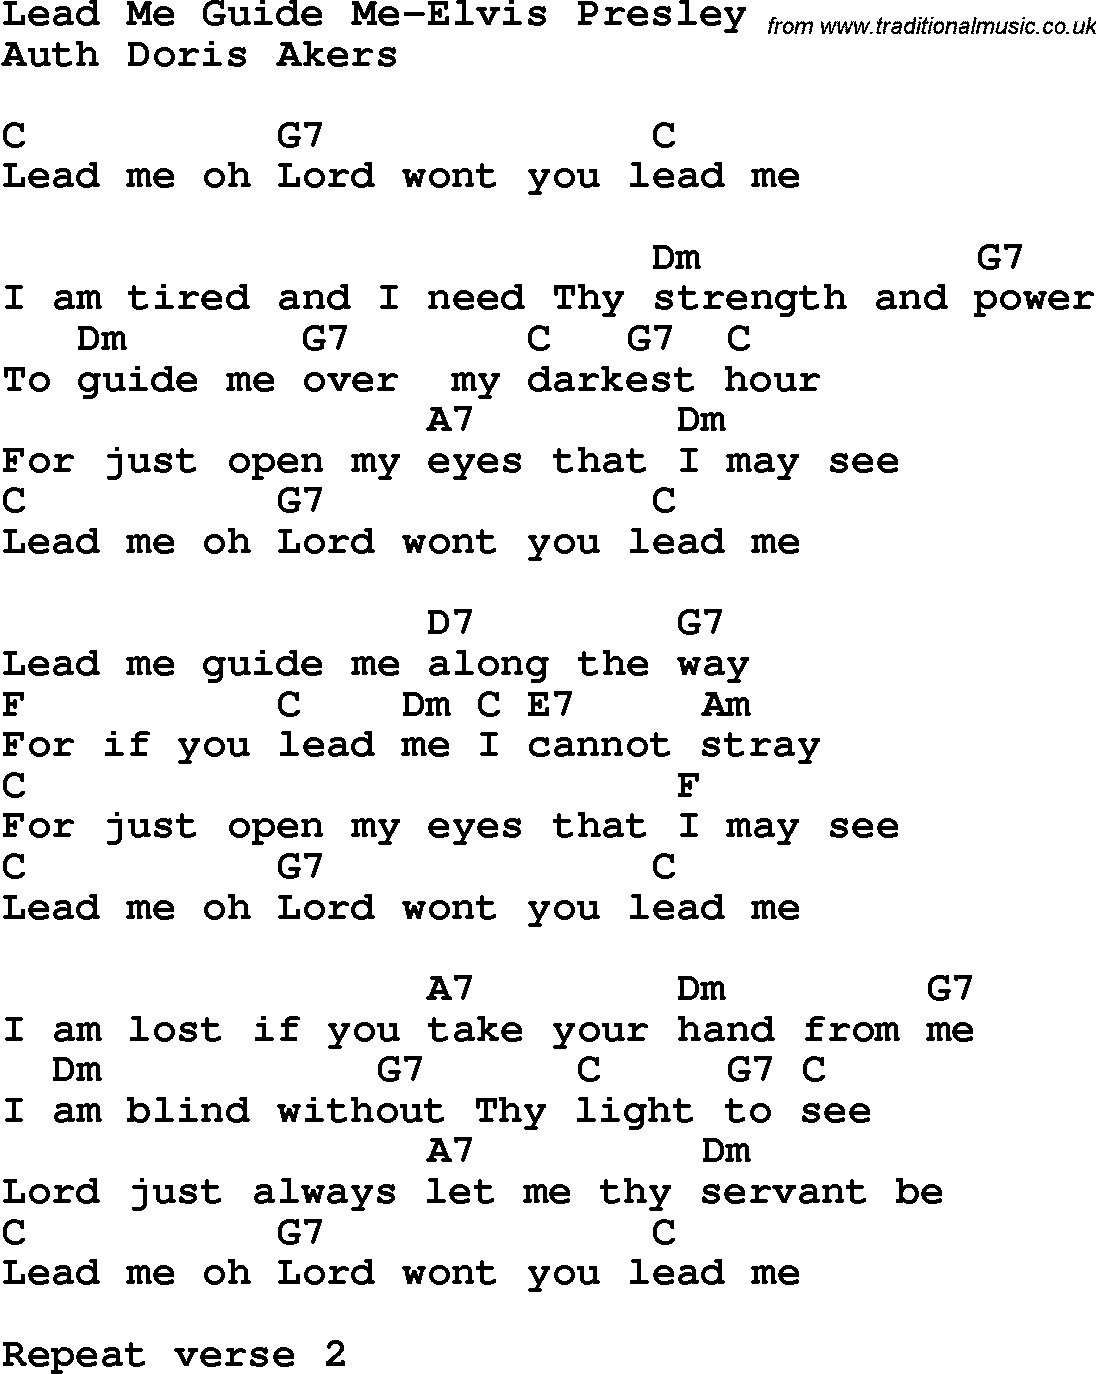 Country, Southern and Bluegrass Gospel Song Lead Me Guide Me-Elvis Presley lyrics and chords